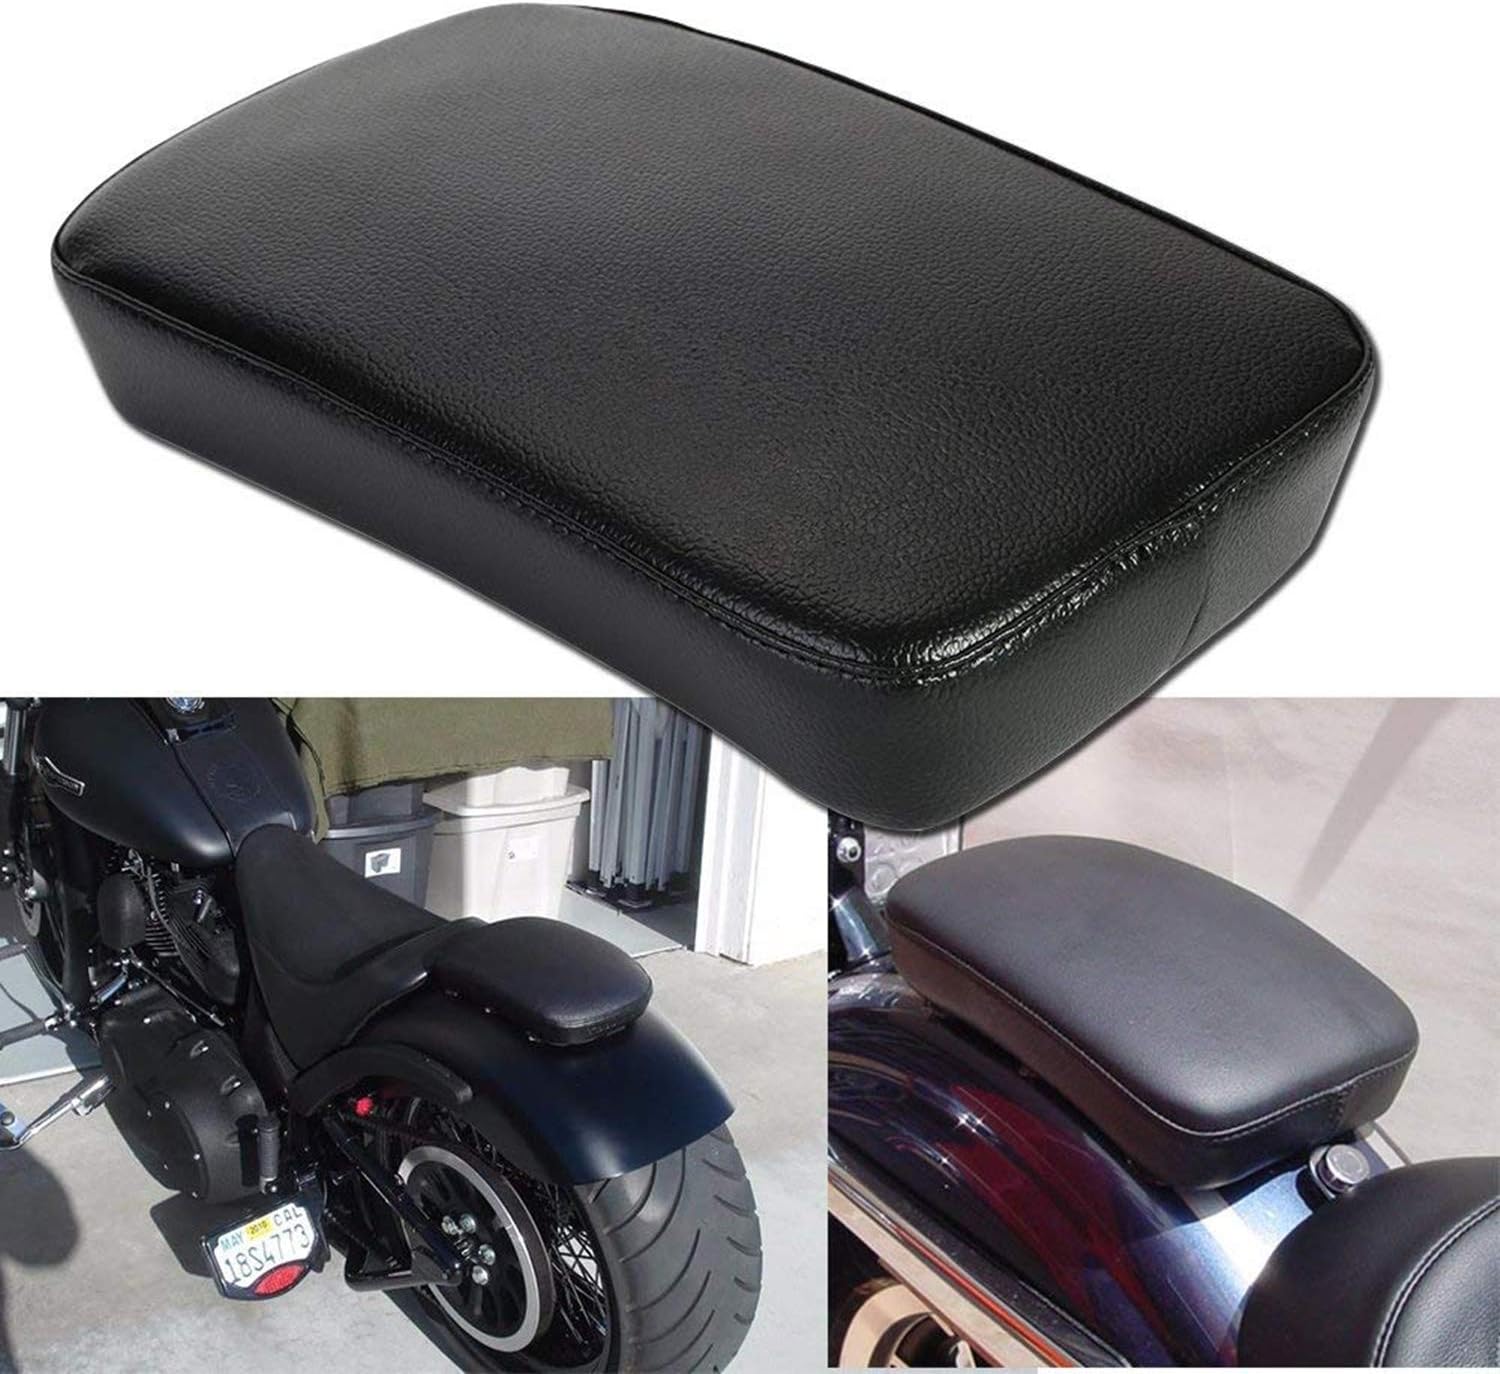 OSAN Leather Pillion Pad 6 Suction Cup Rear Passenger Seat for Harley Custom Bikes - OSAN Leather Pillion Pad Review